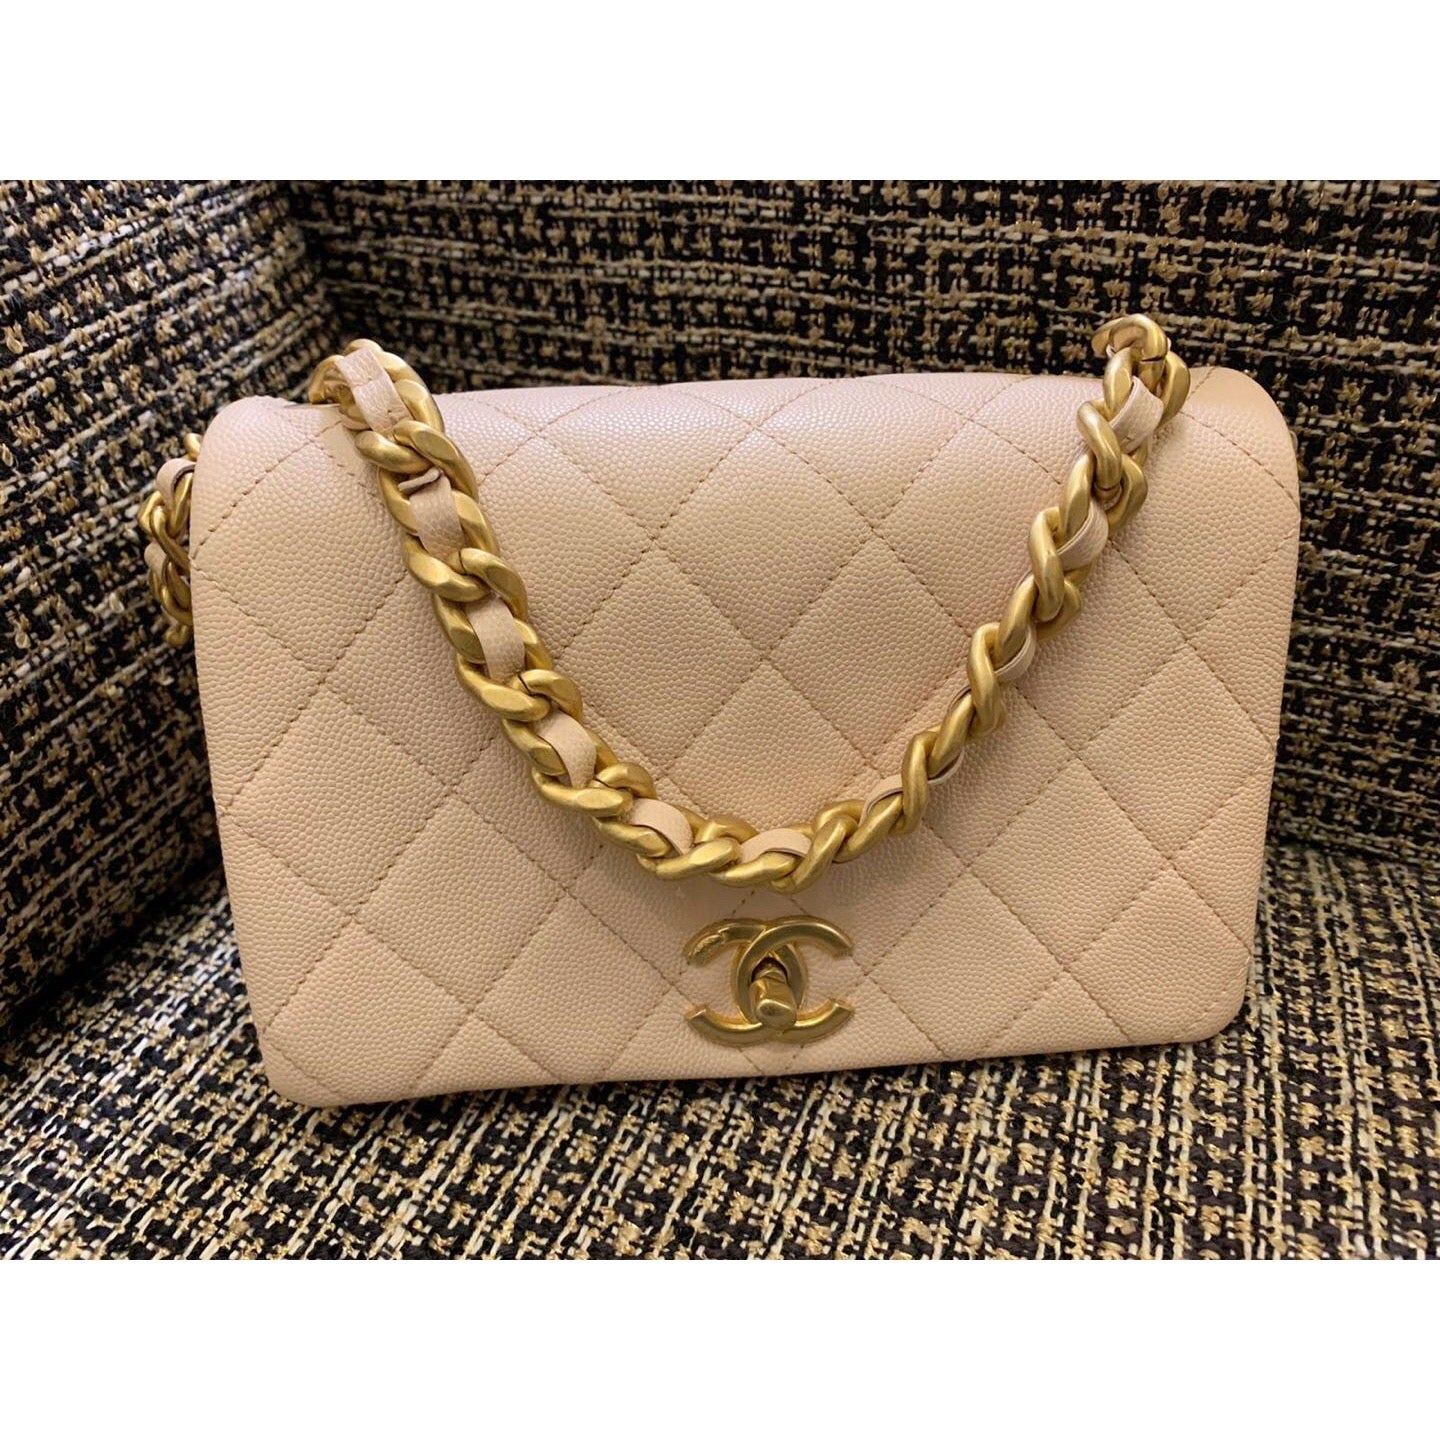 CHANEL Shiny Lambskin Quilted Small Fashion Therapy Bowling Bag Lilac  1007400